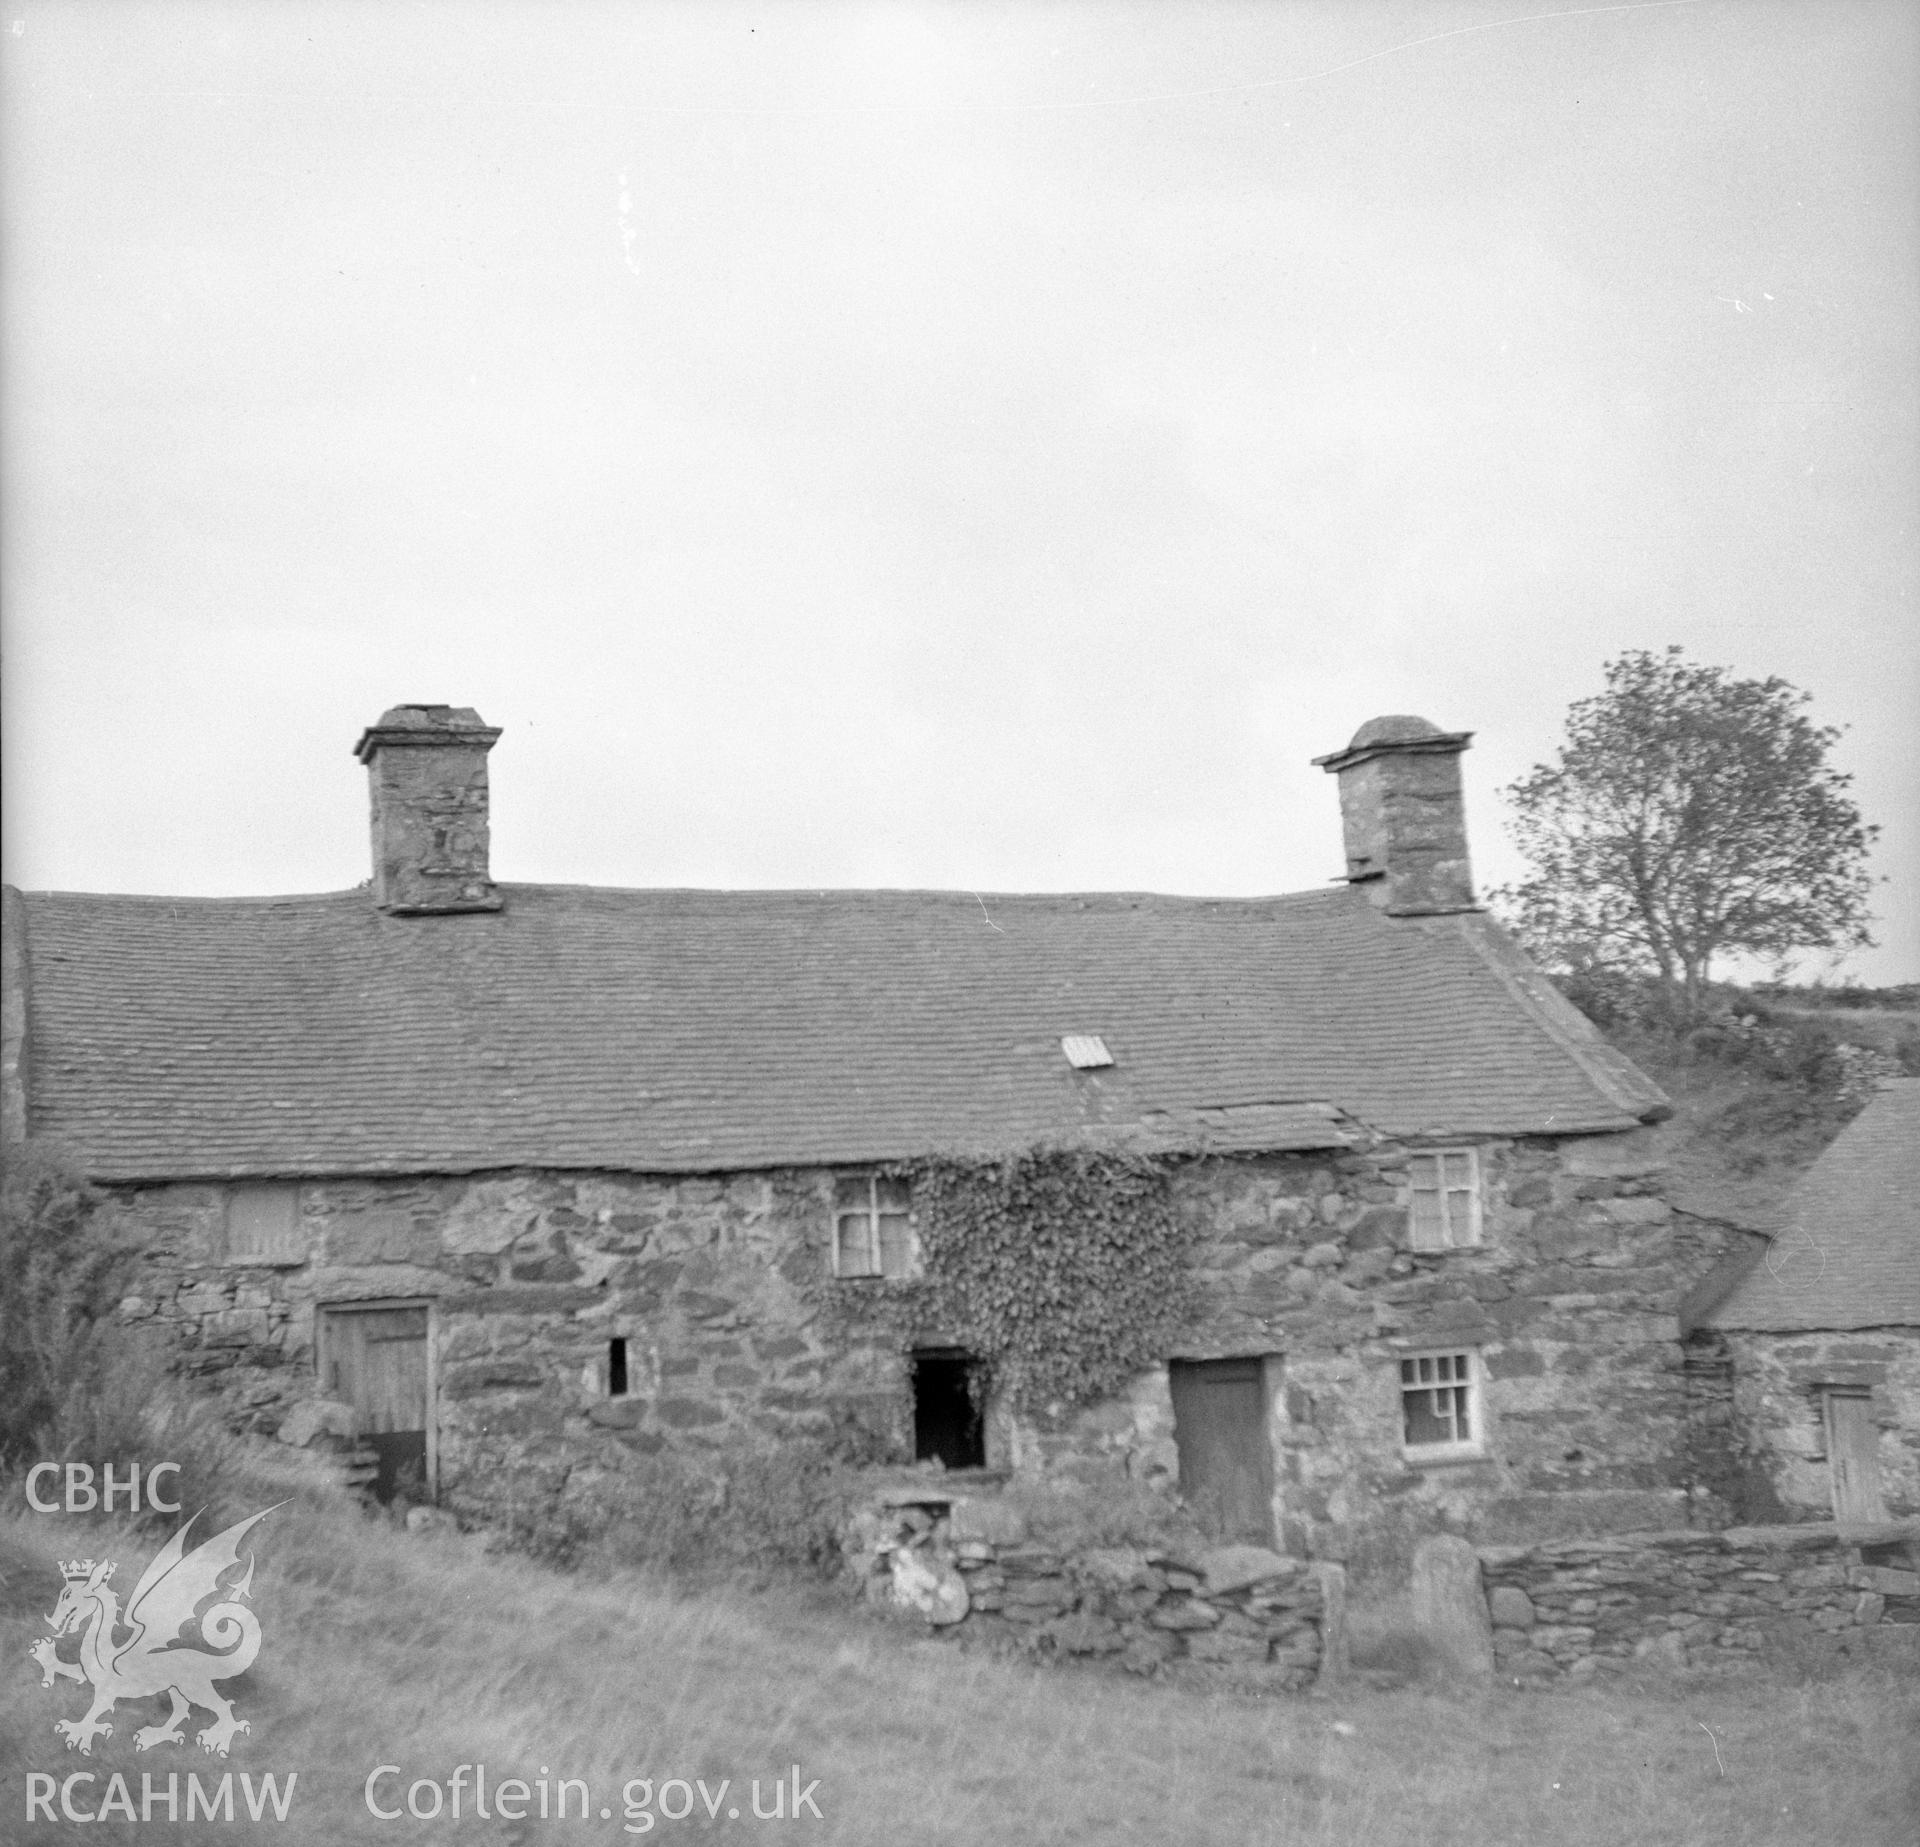 Digital copy of an undated nitrate negative showing a view of Coed Mawr, Merioneth.